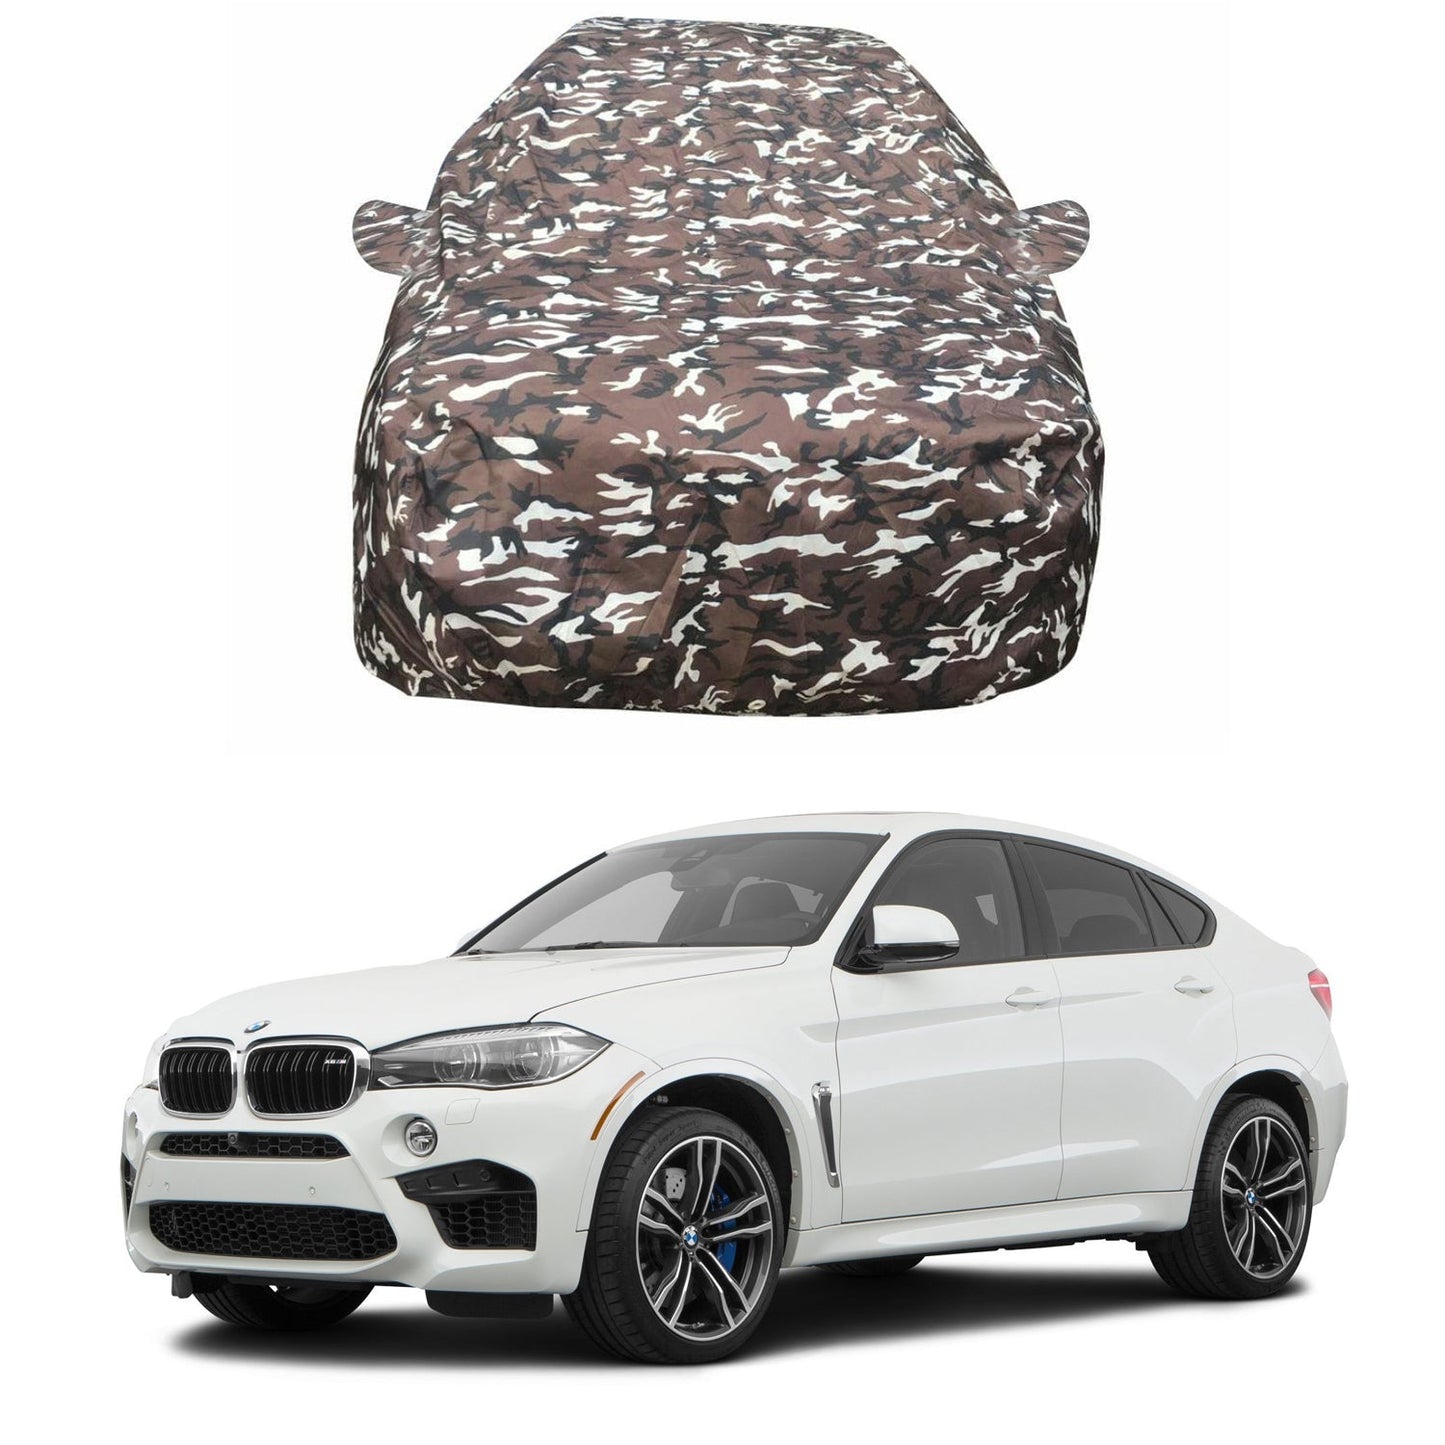 Oshotto Ranger Design Made of 100% Waterproof Fabric Car Body Cover with Mirror Pockets For BMW X6